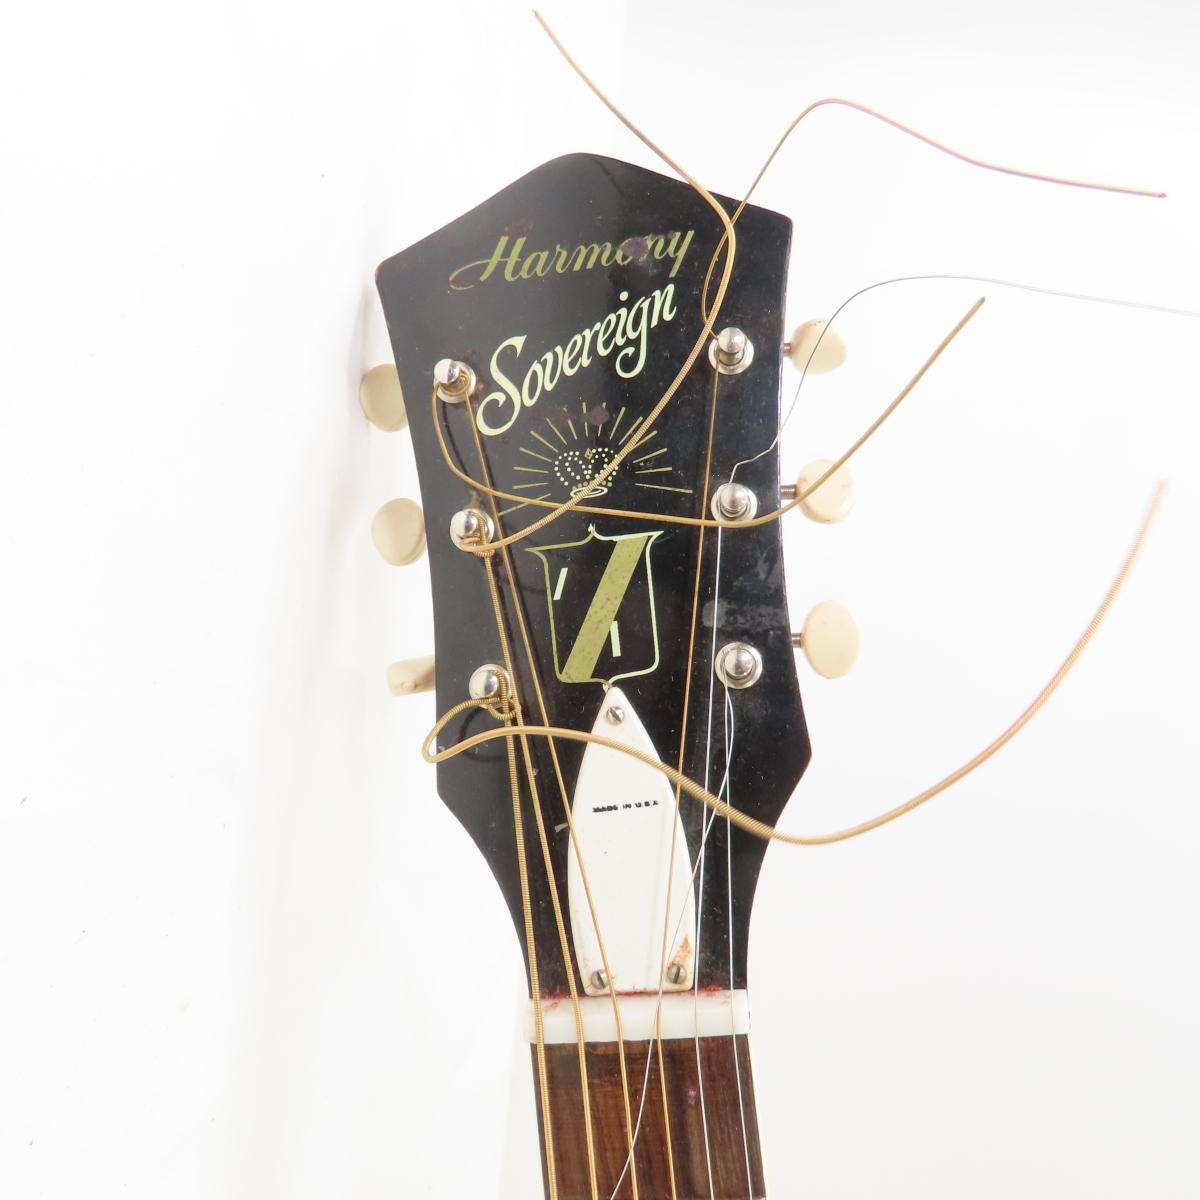 Sovereign Harmony 6 String Acoustic Guitar in Case